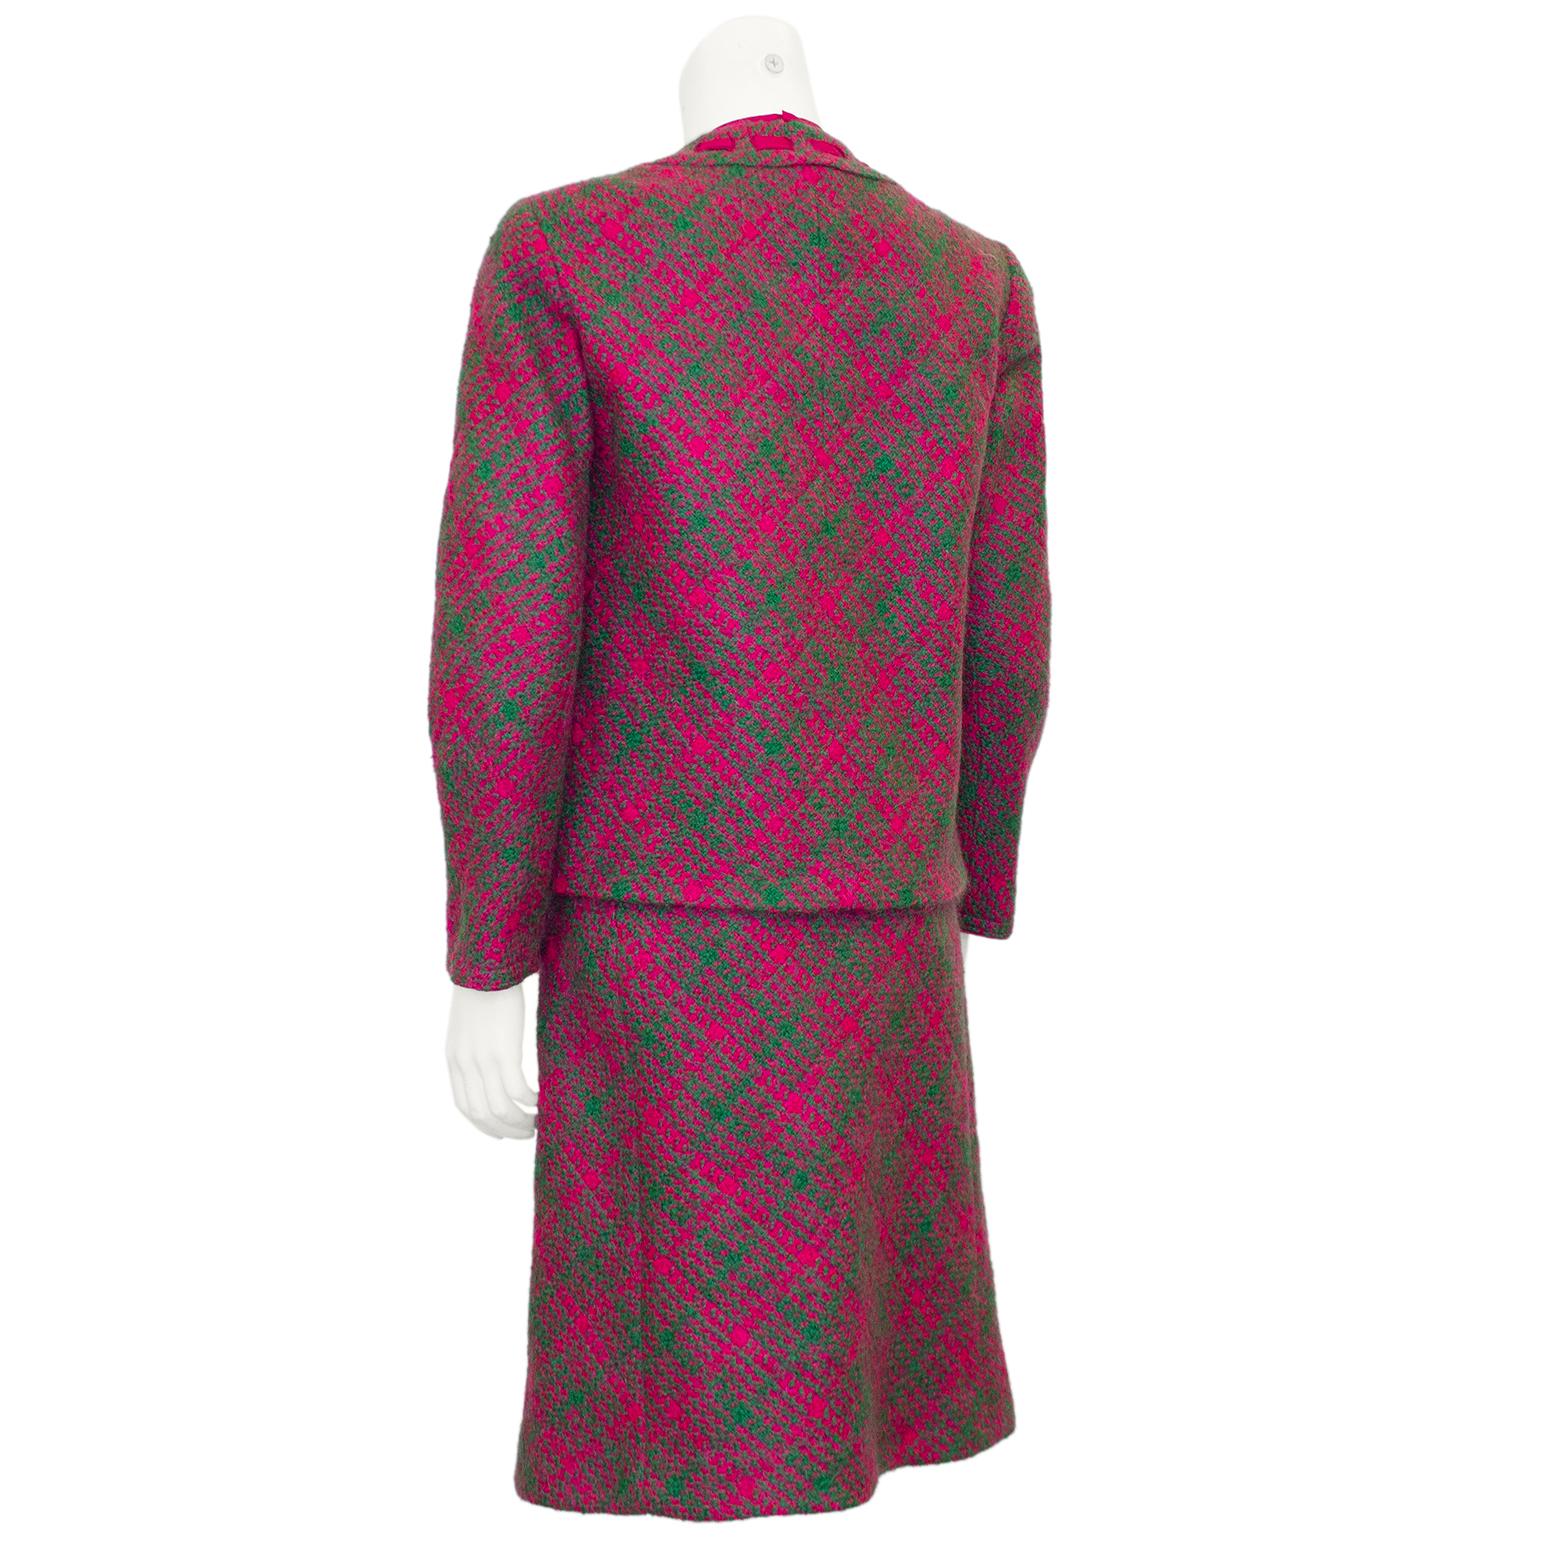 1960s Chanel Haute Couture Magenta and Green Dress and Jacket Ensemble In Good Condition For Sale In Toronto, Ontario